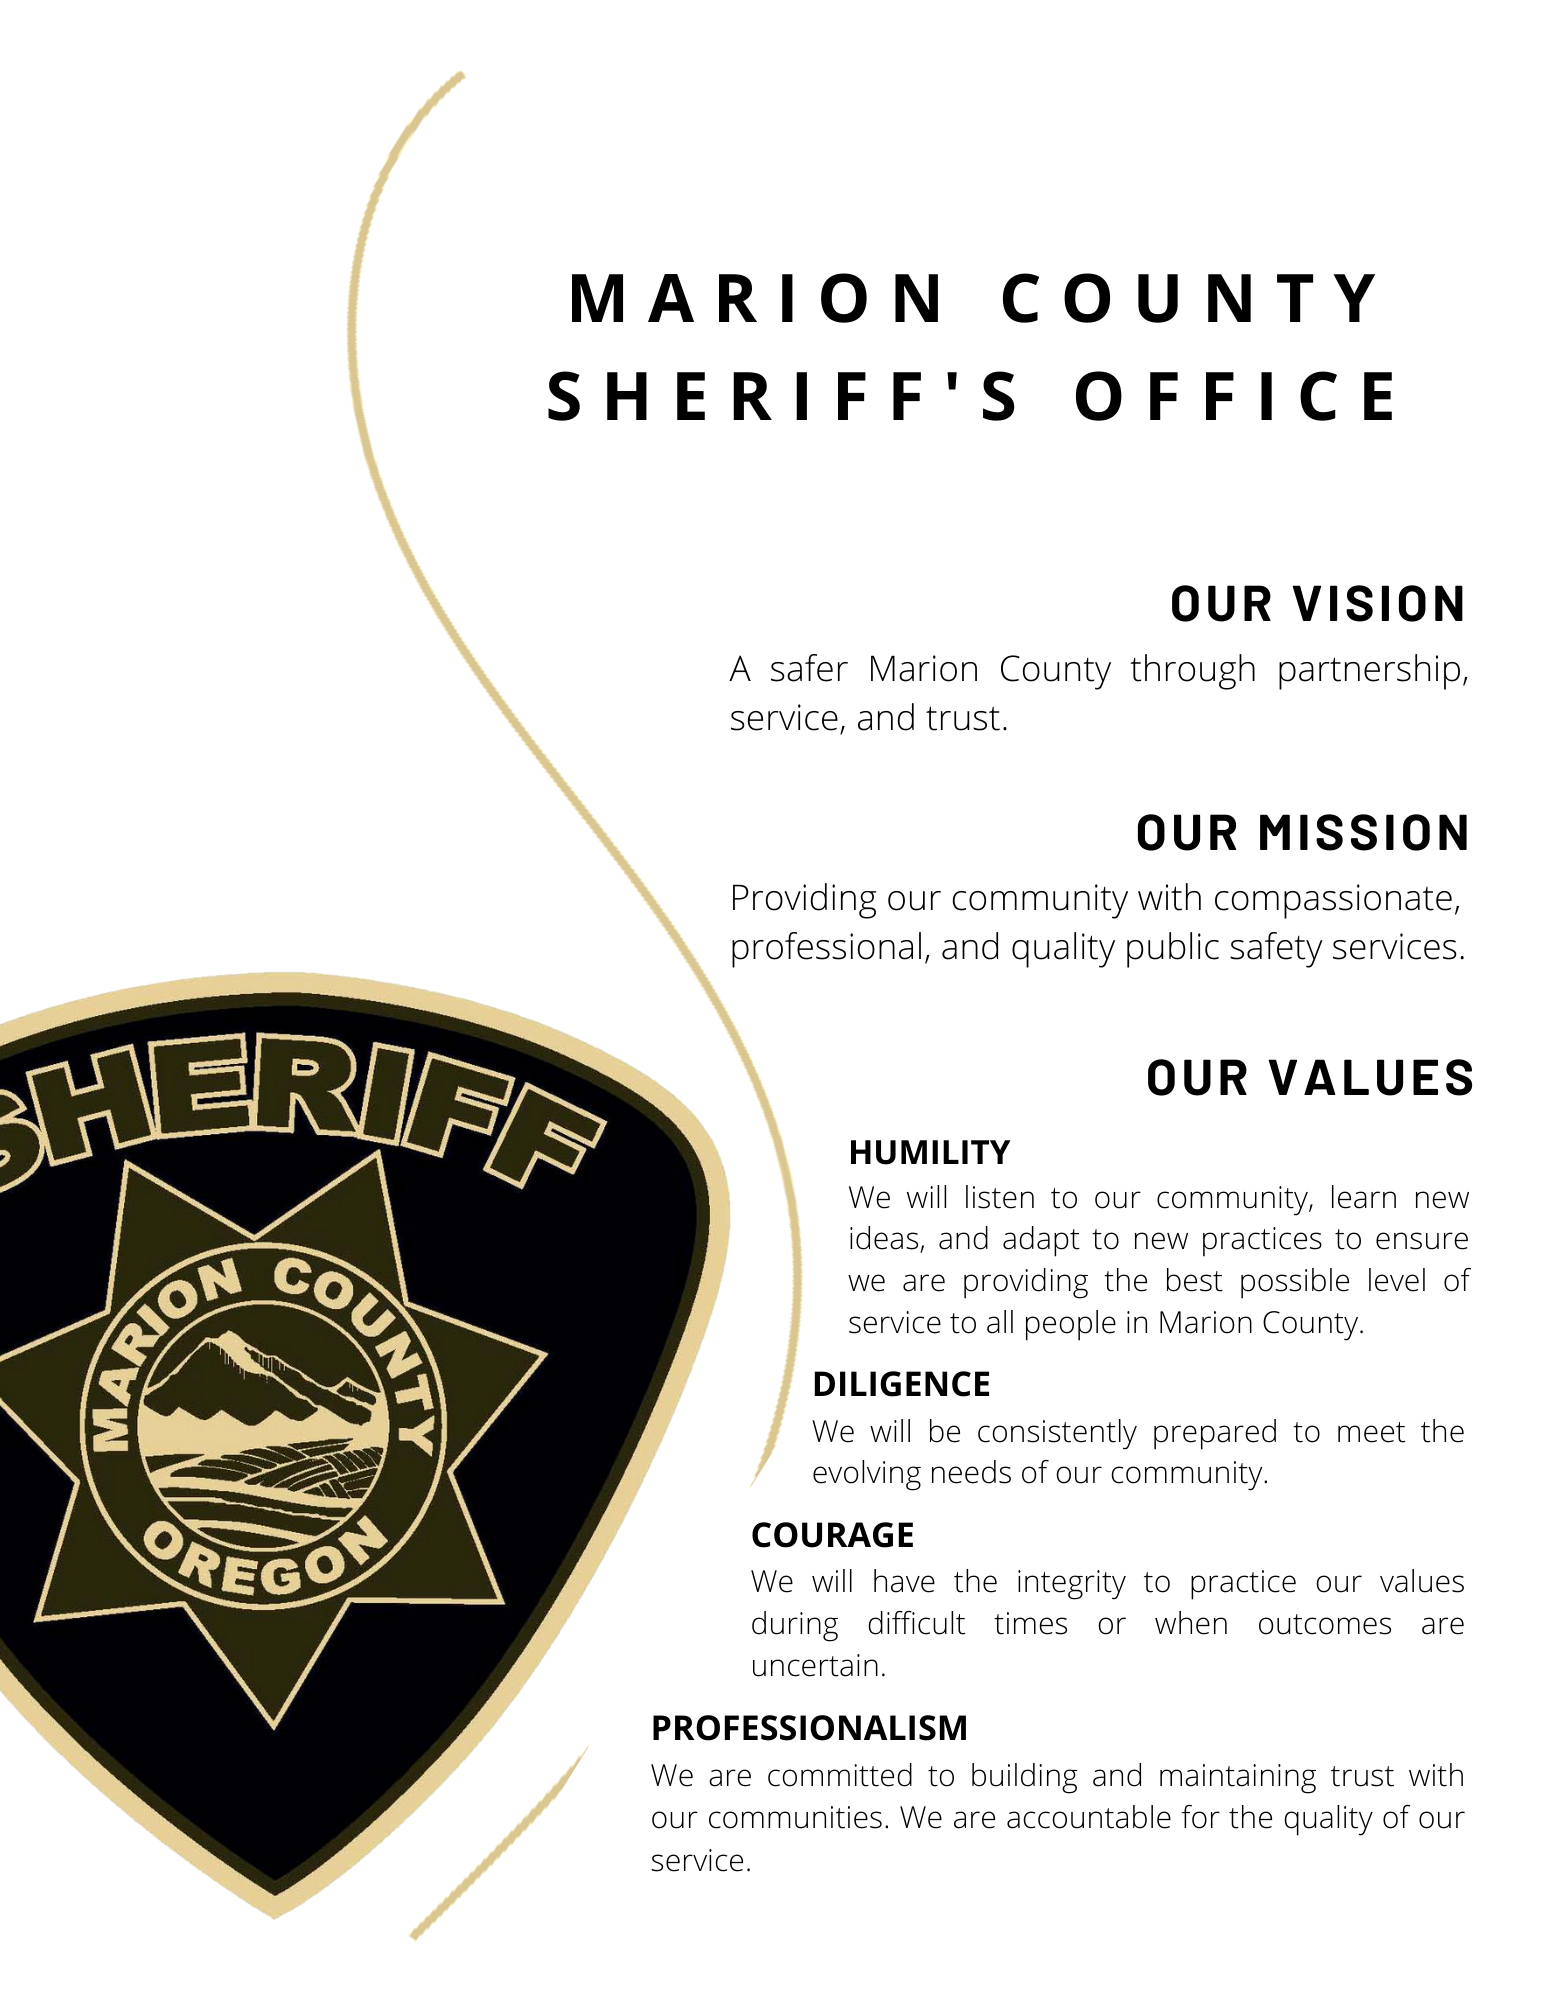 MCSO Values Image.png